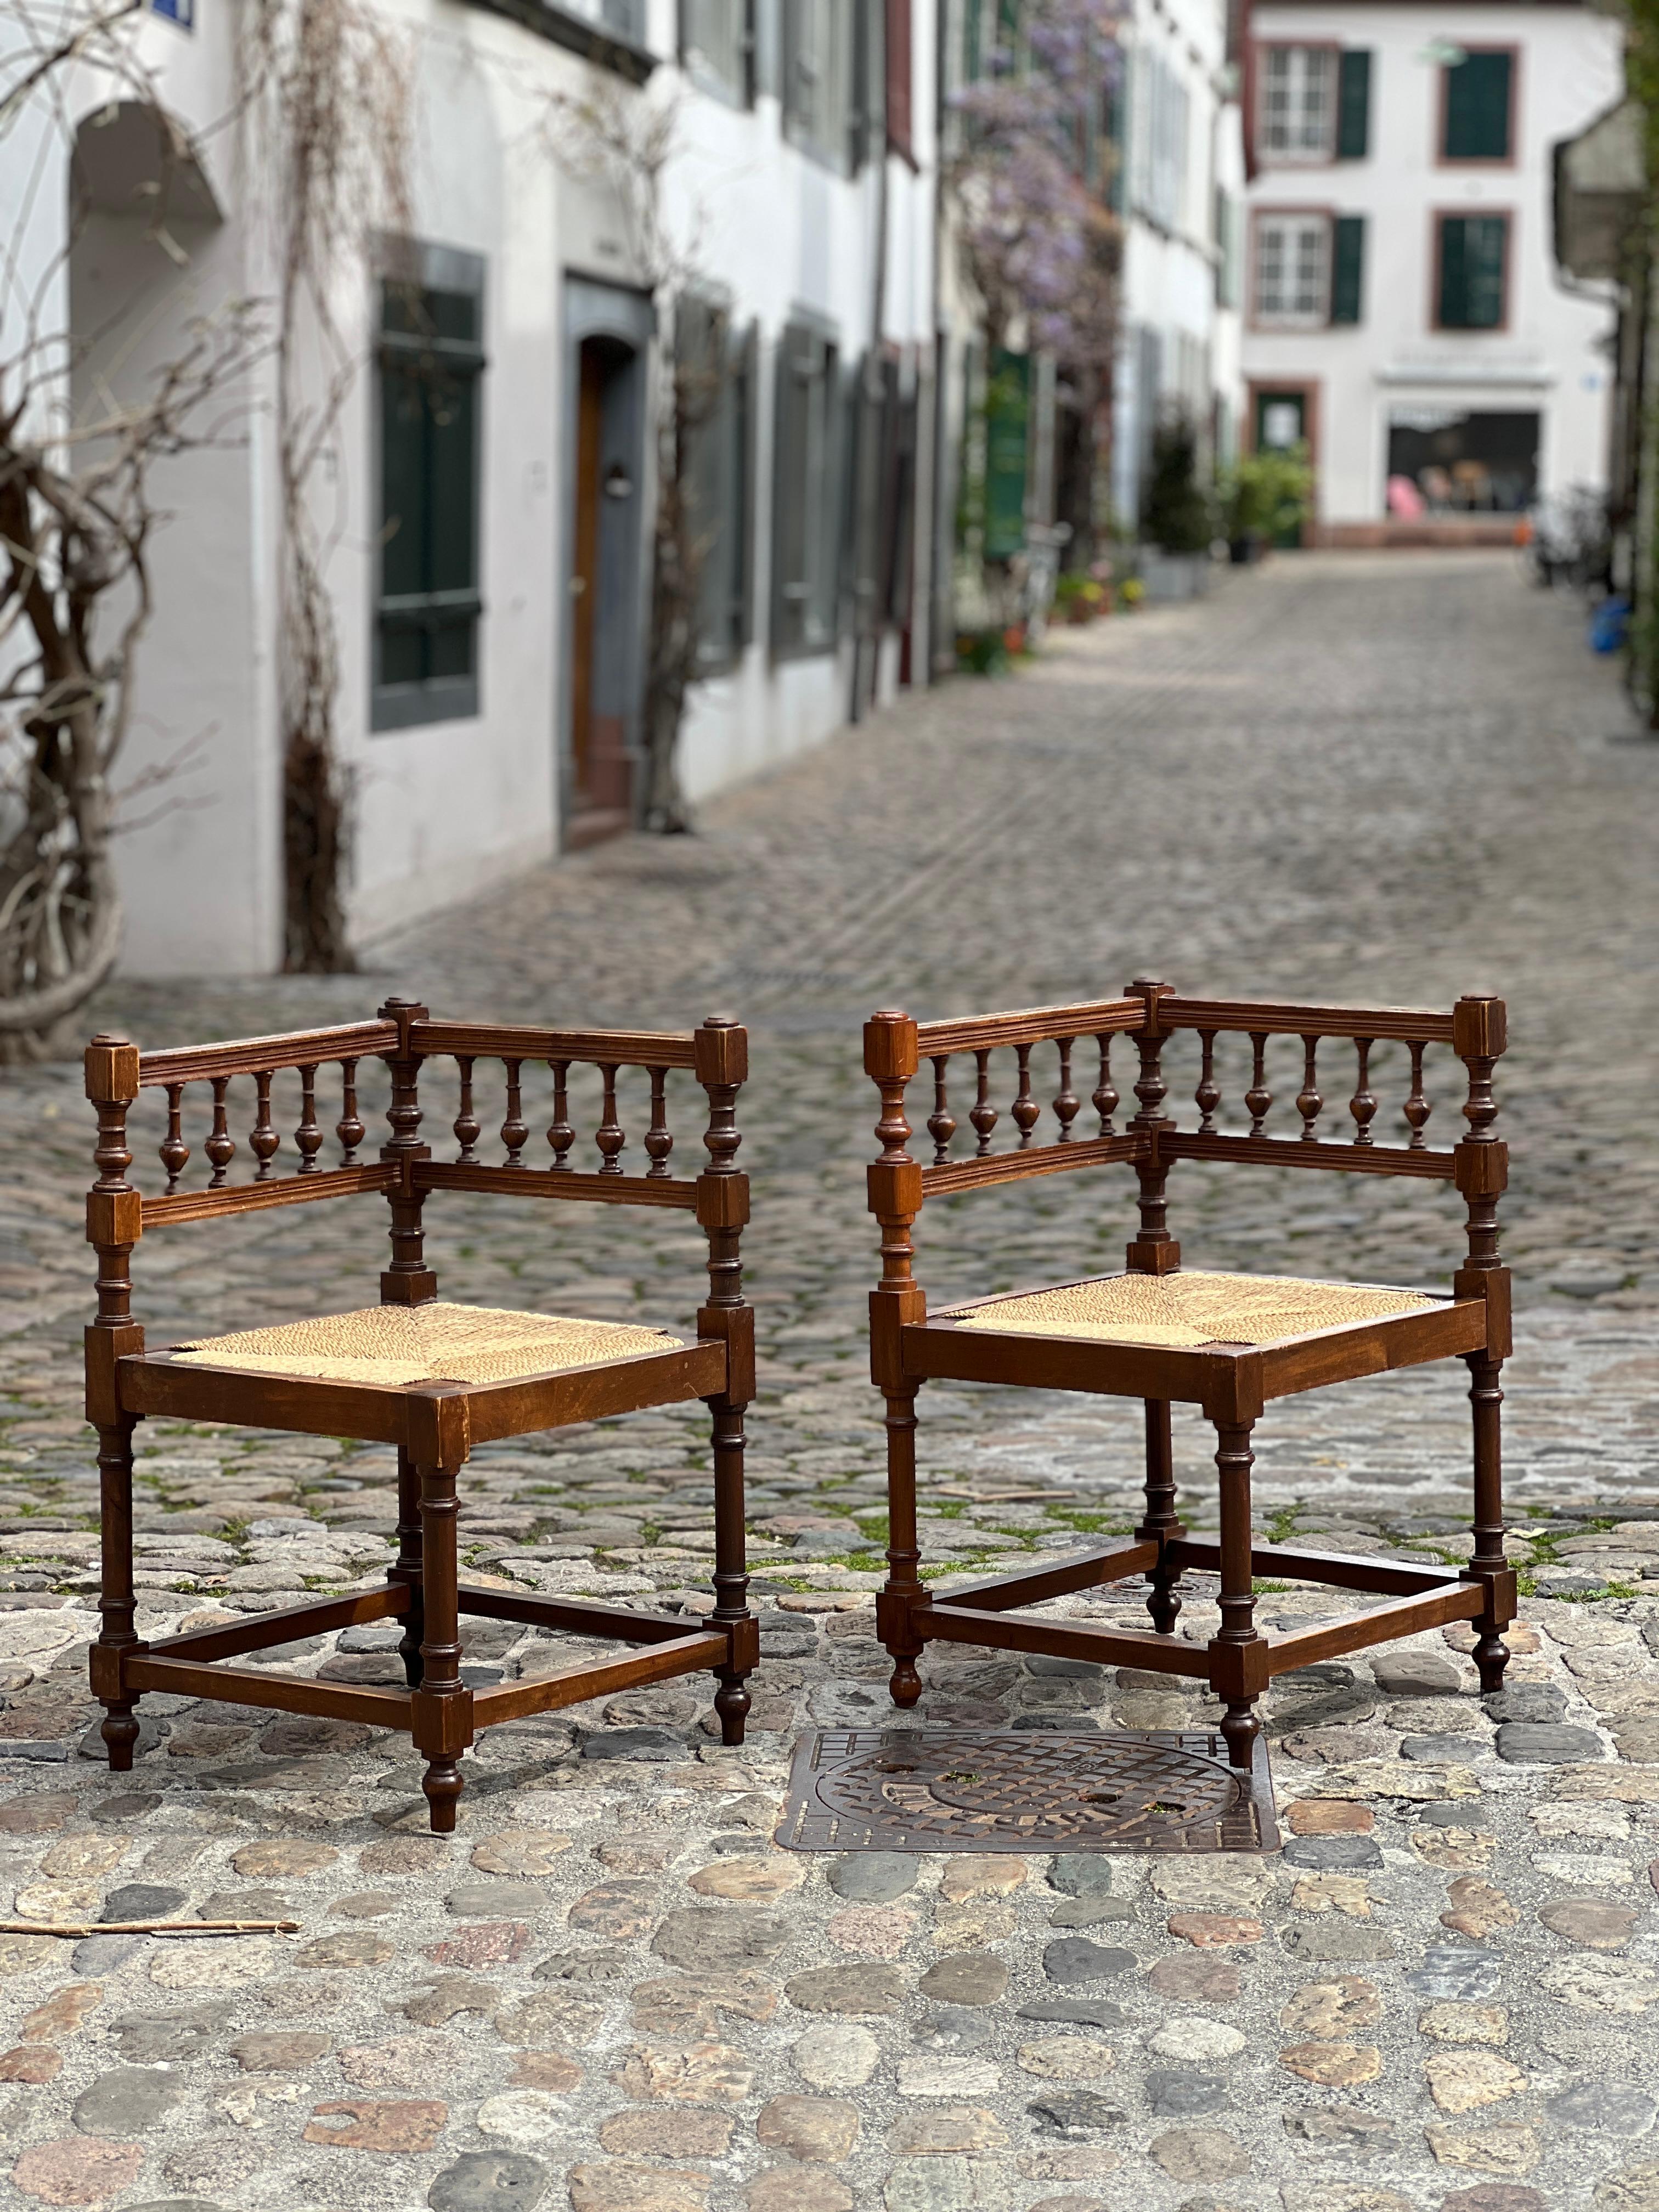 Add a sense of classic French charm to your home with this exquisite pair of 19th century corner chairs. These chairs have been carefully crafted with a meticulous attention to detail, making them a true statement of elegance and